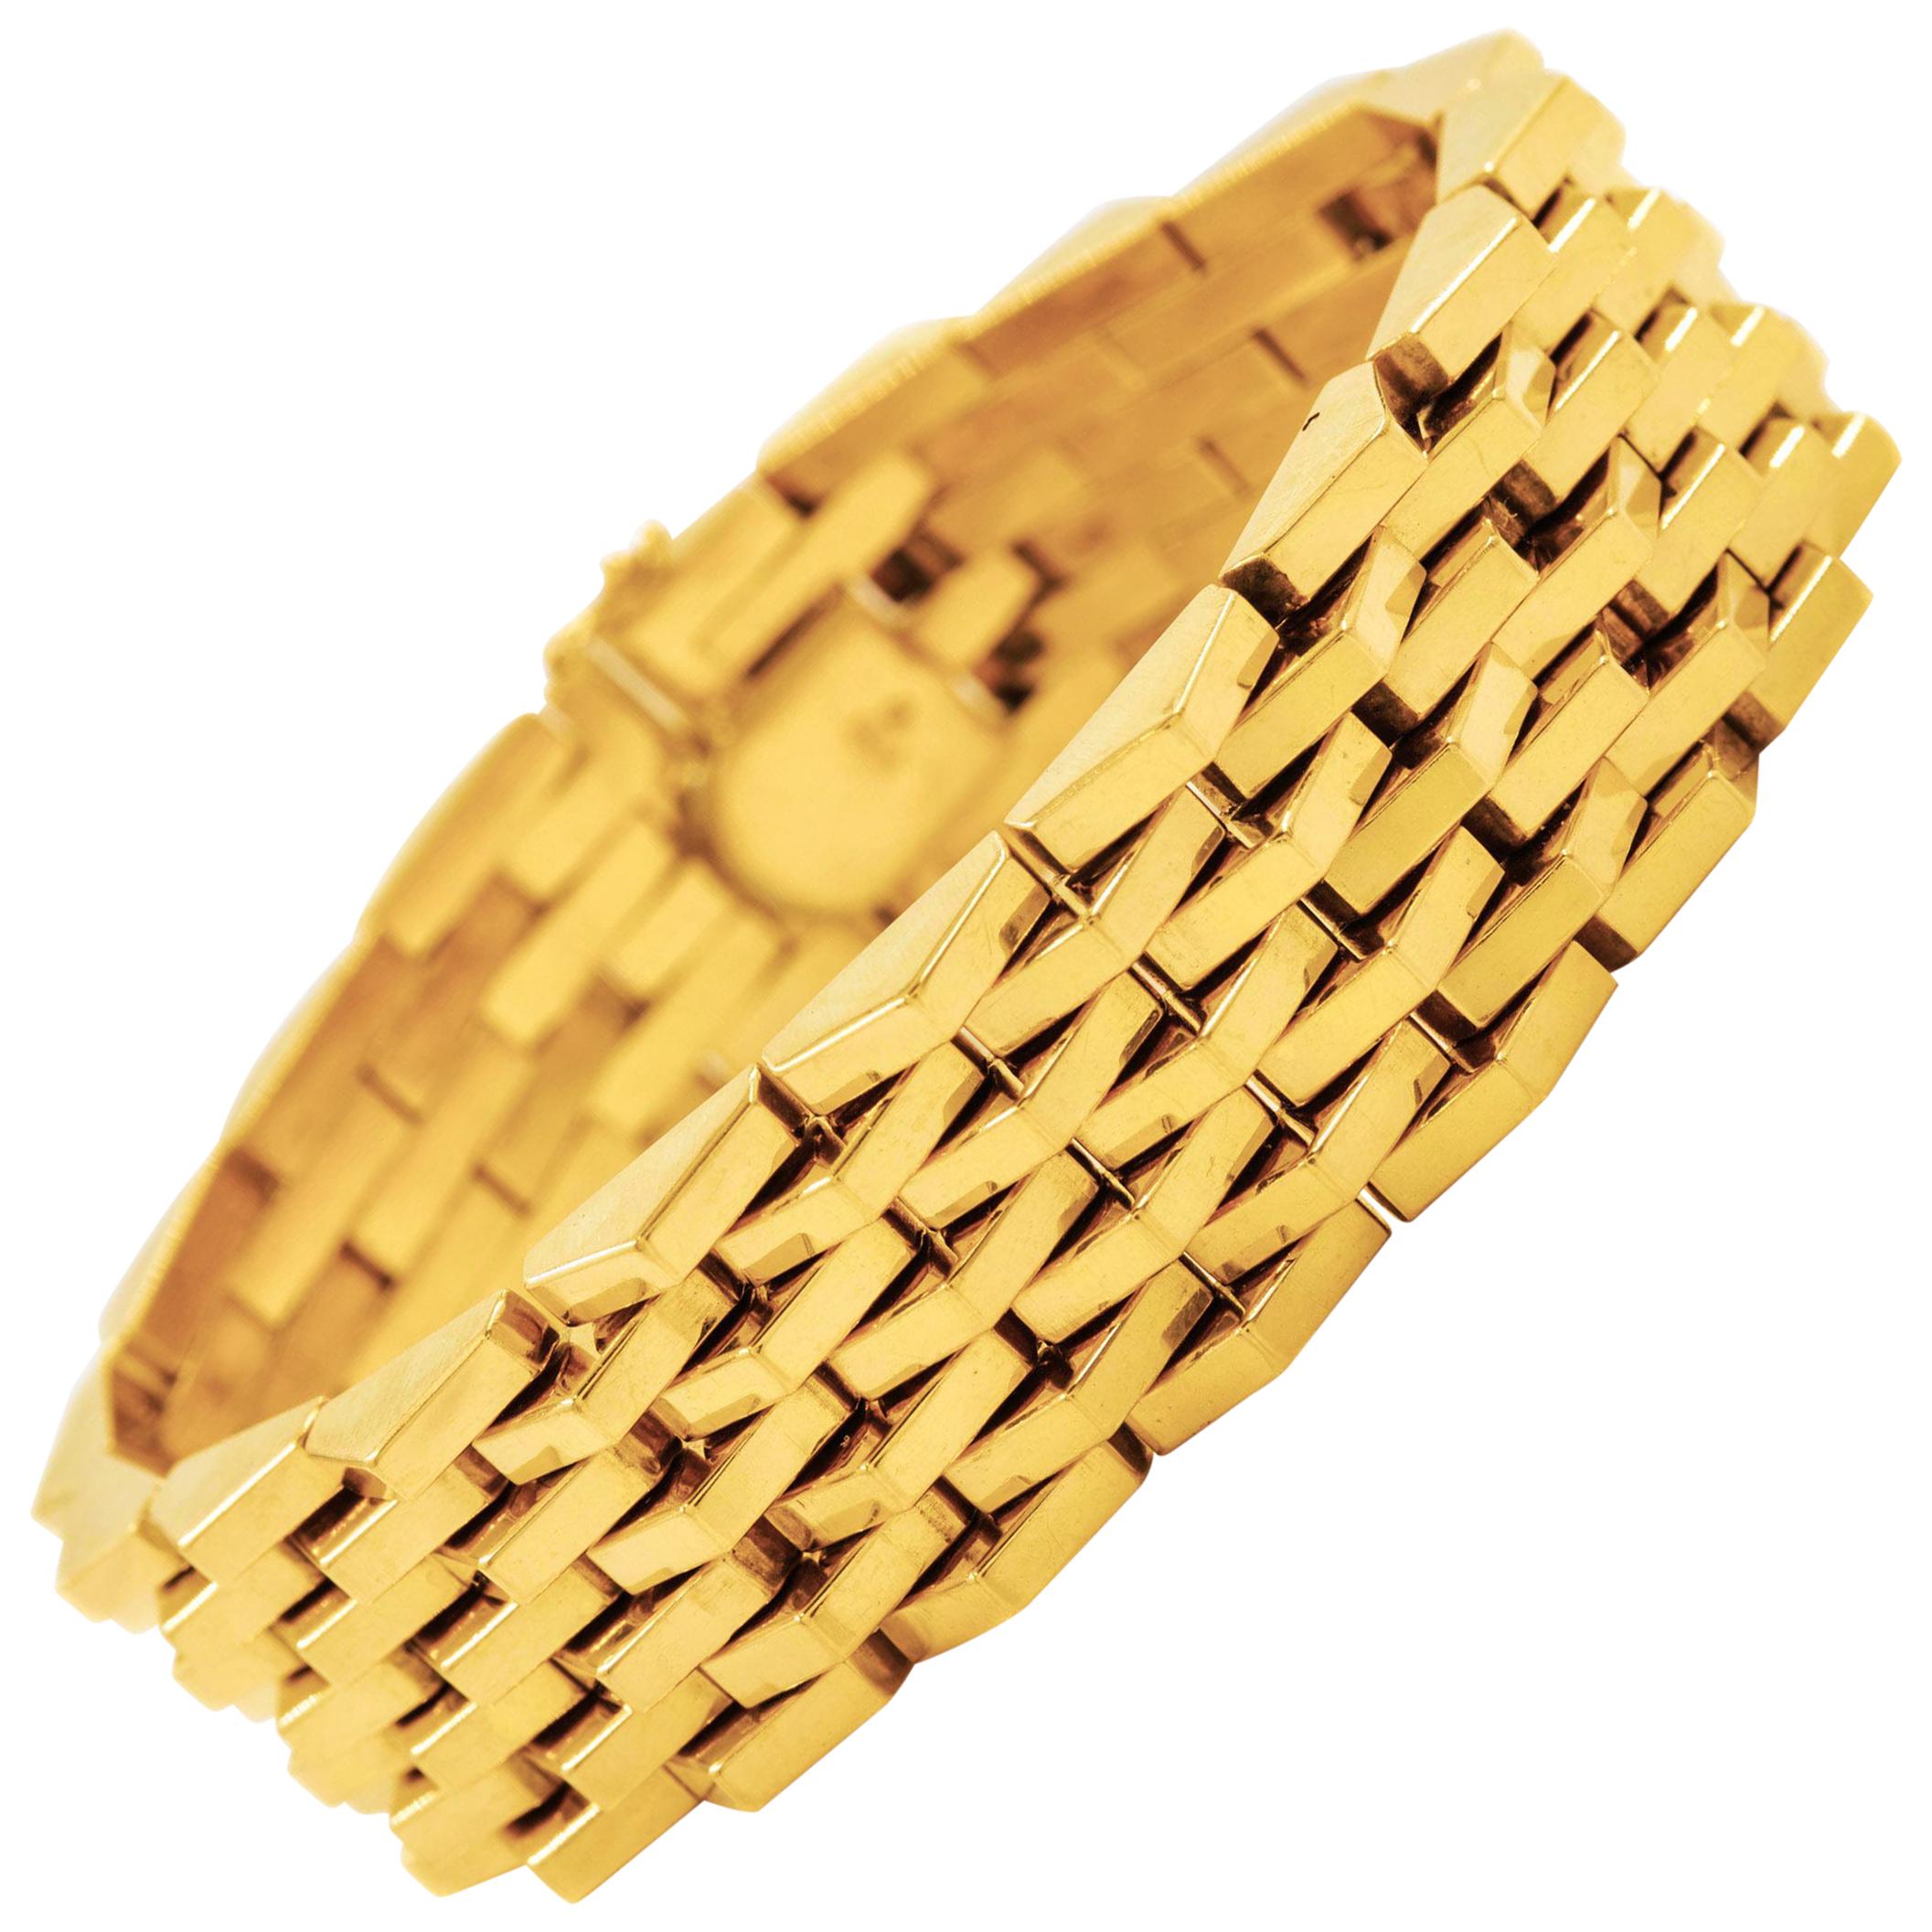 Solid 18k Yellow Gold Bracelet with Pentagonal Links, 7 1/4" L For Sale